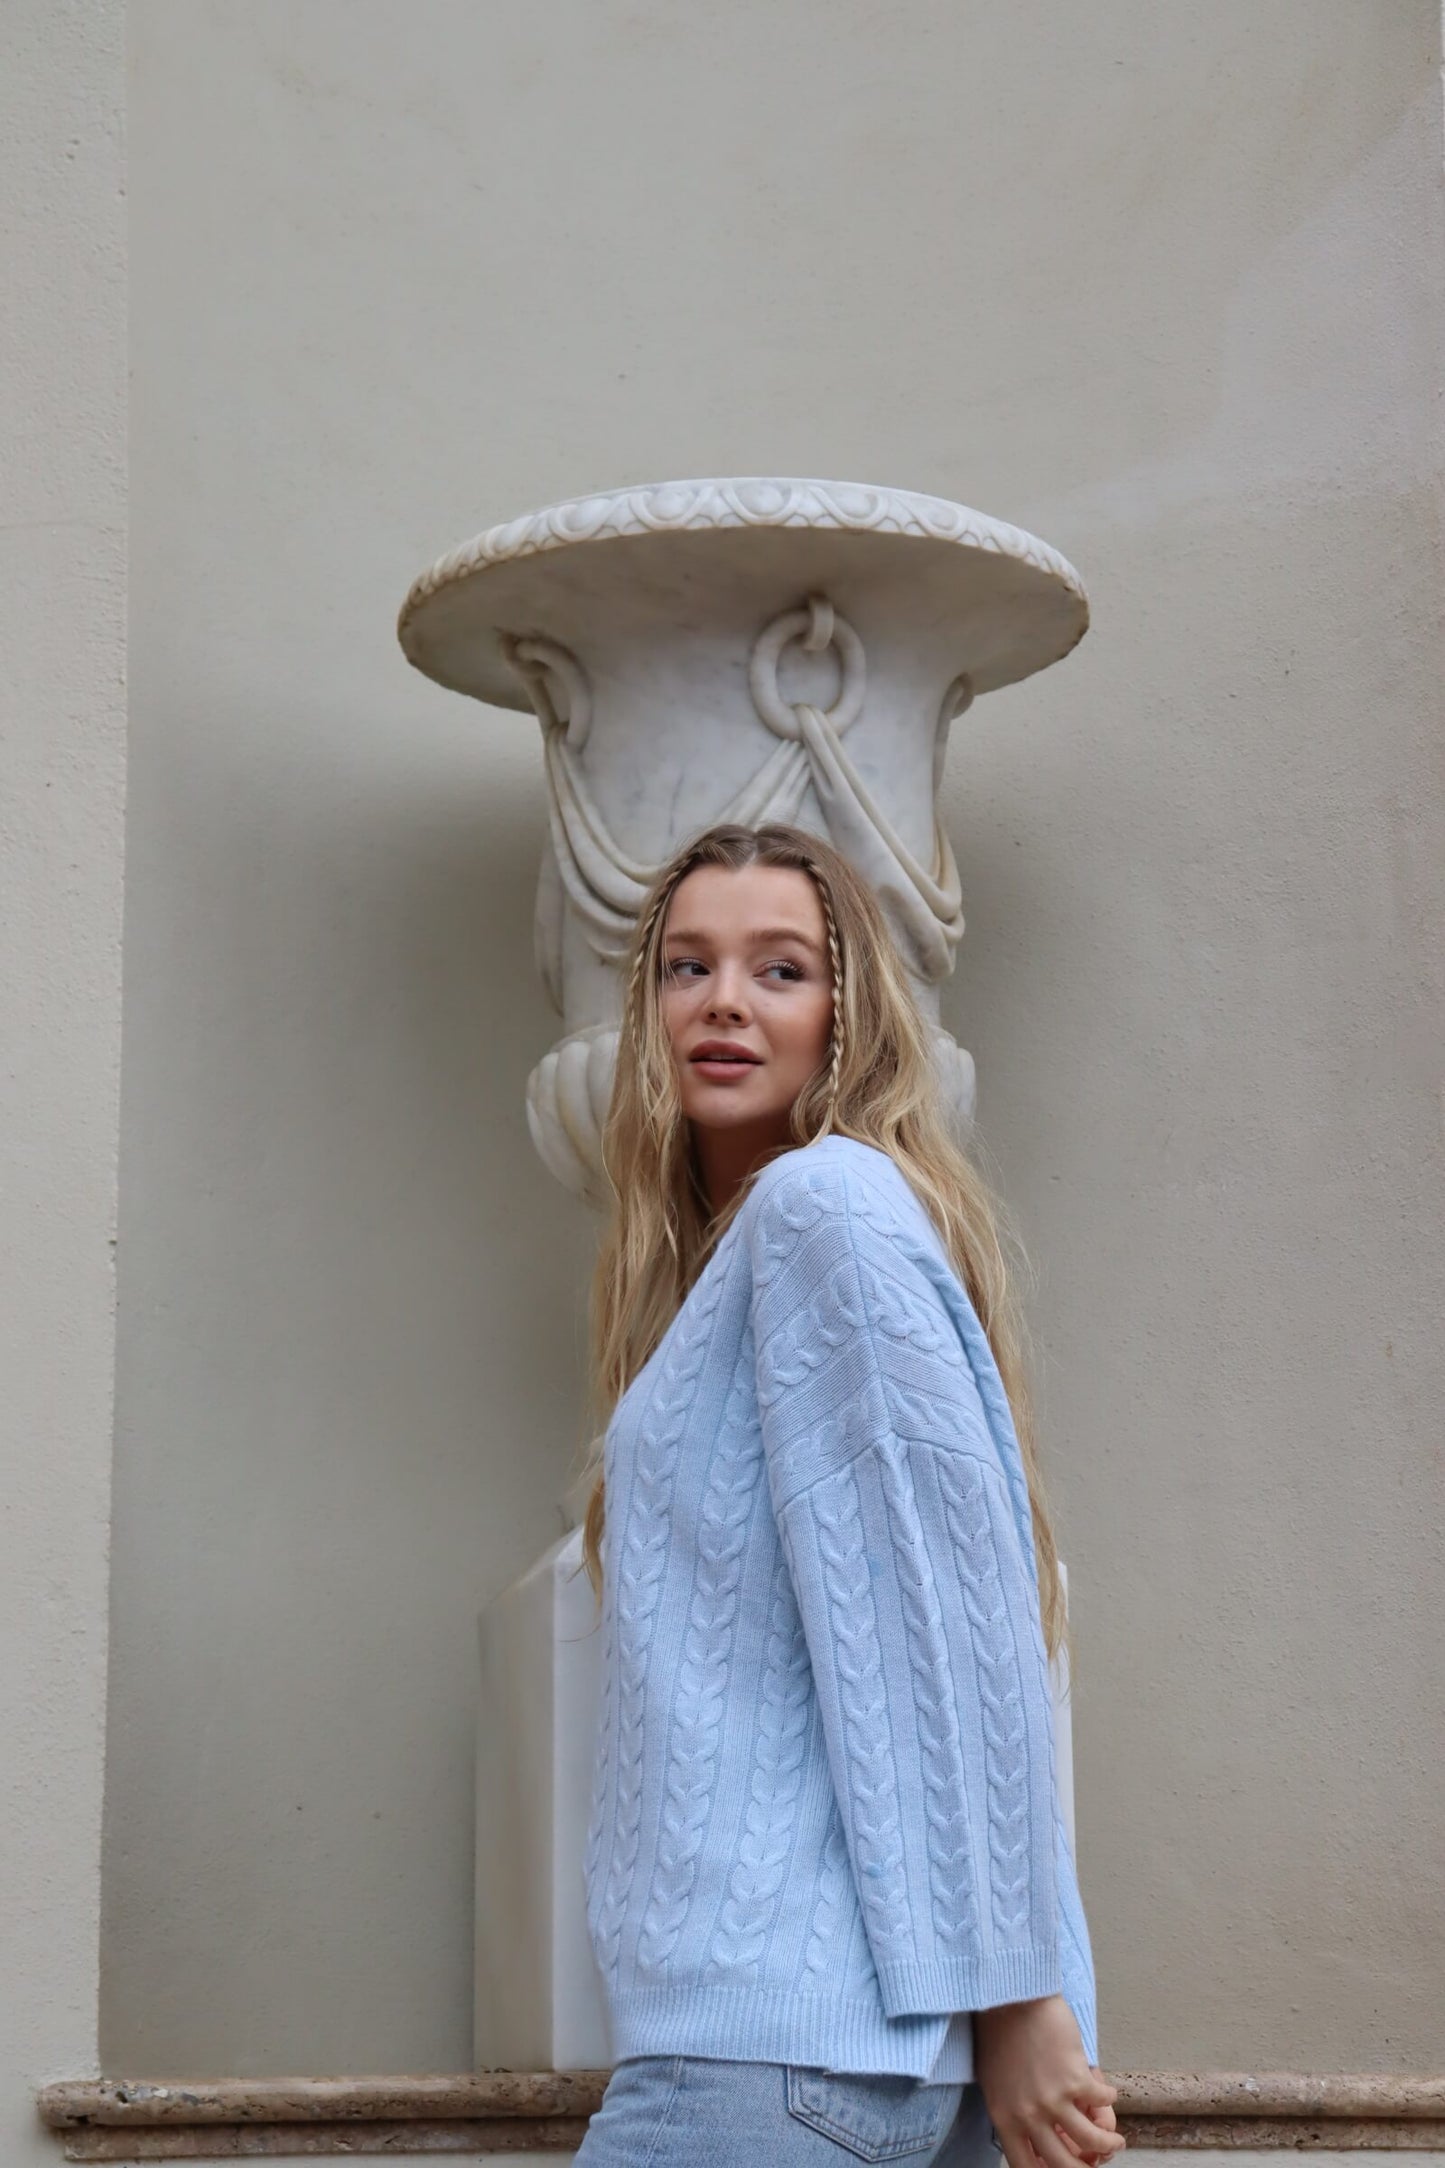 O'TAY Berry Sweater Blouses Pastel Blue